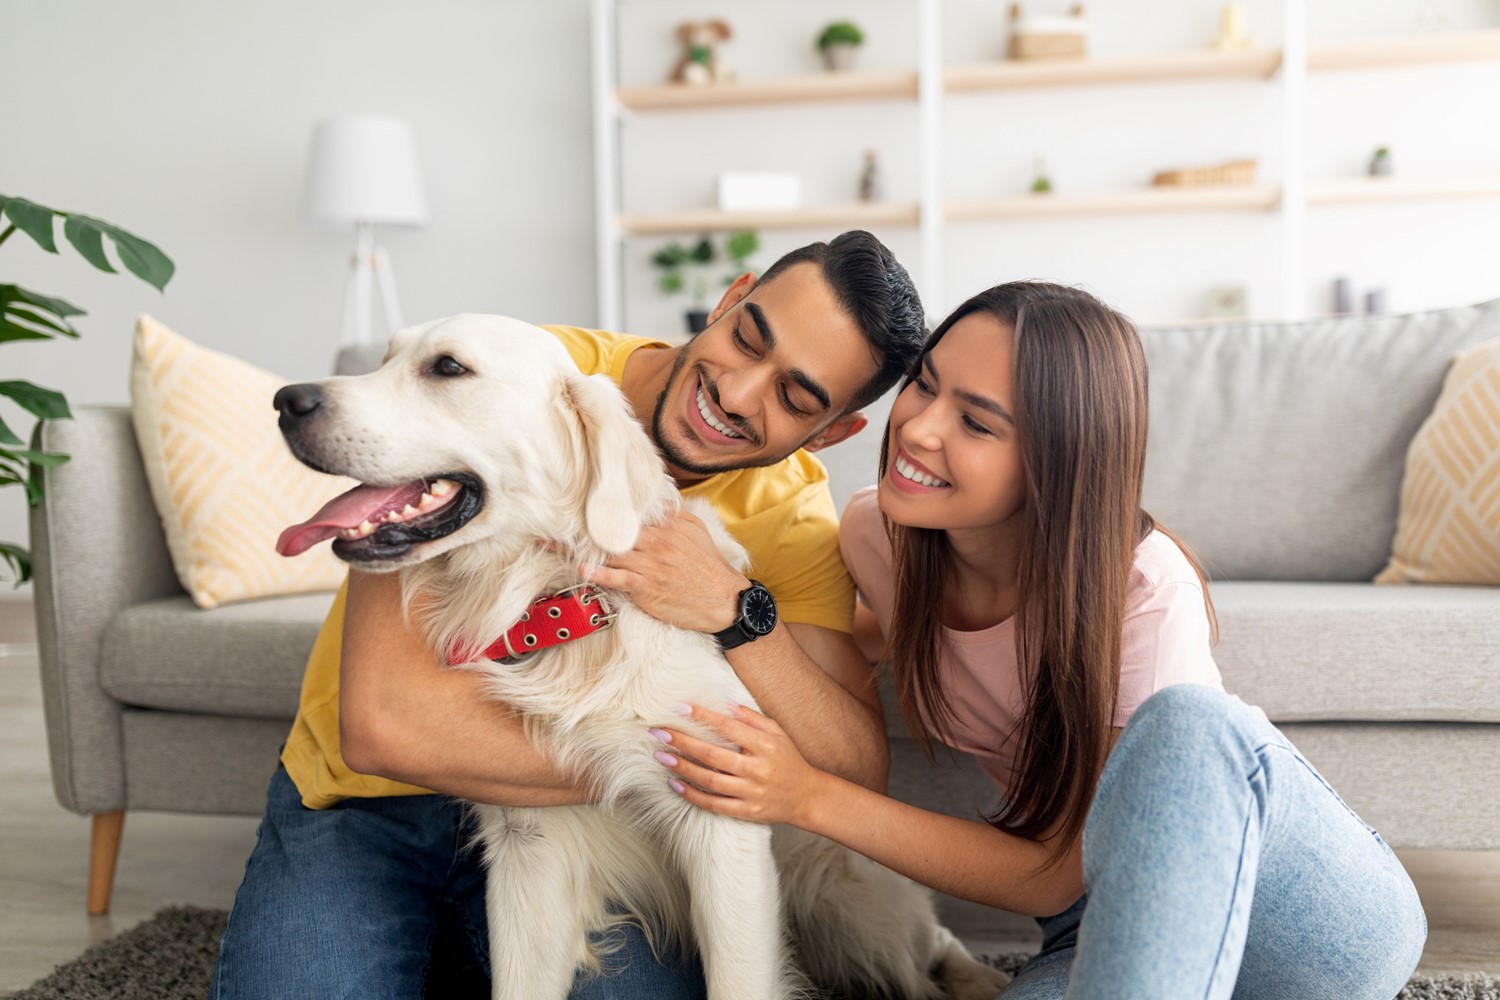 A Smiling Man and Woman Sitting on the Floor in Front of a Couch Embrace a White Golden Retriever with its Tongue Out